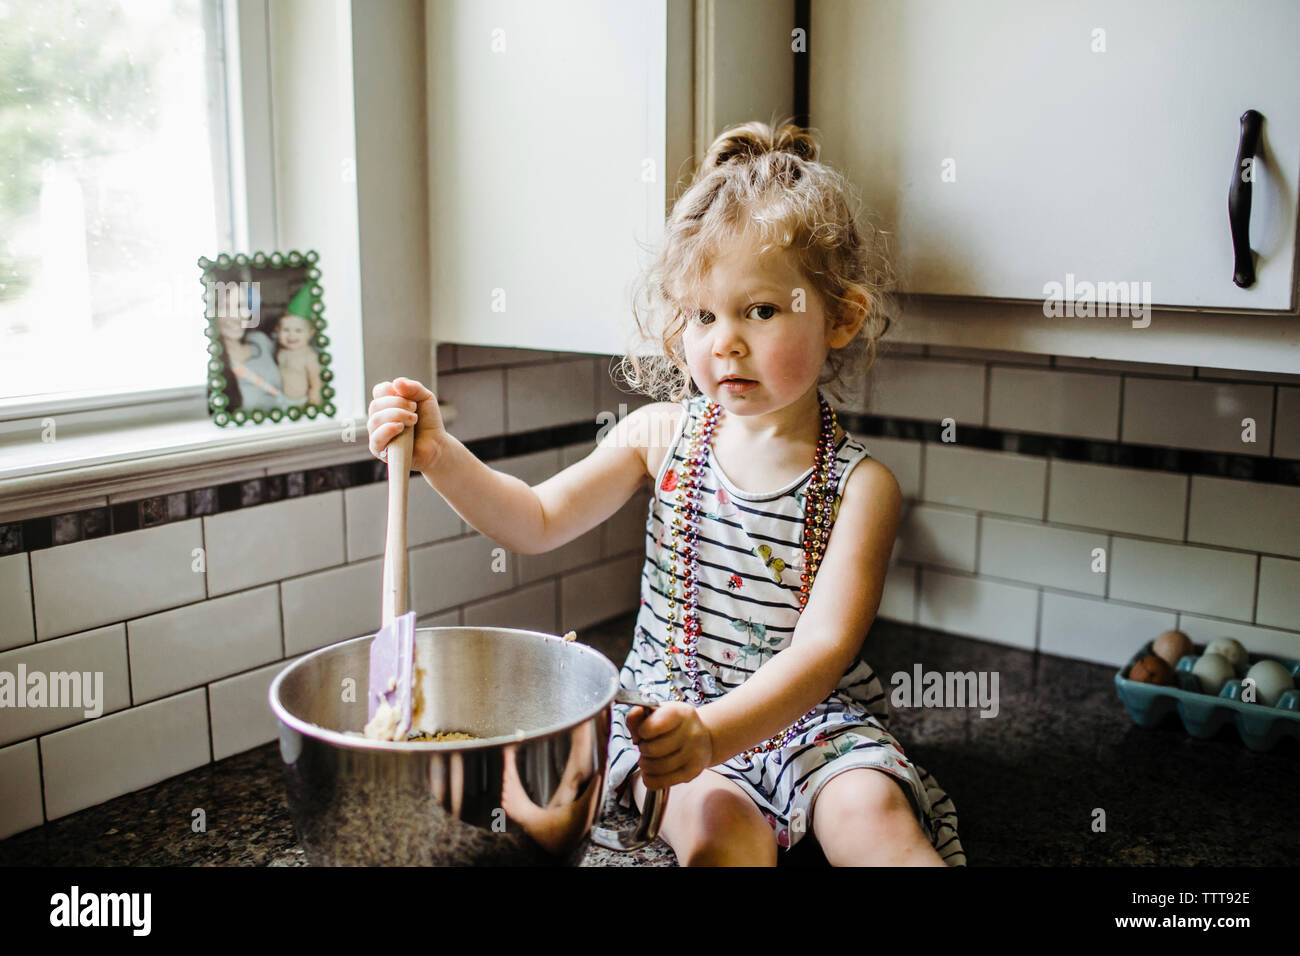 Portrait of cute girl preparing food in container while sitting on kitchen counter at home Stock Photo